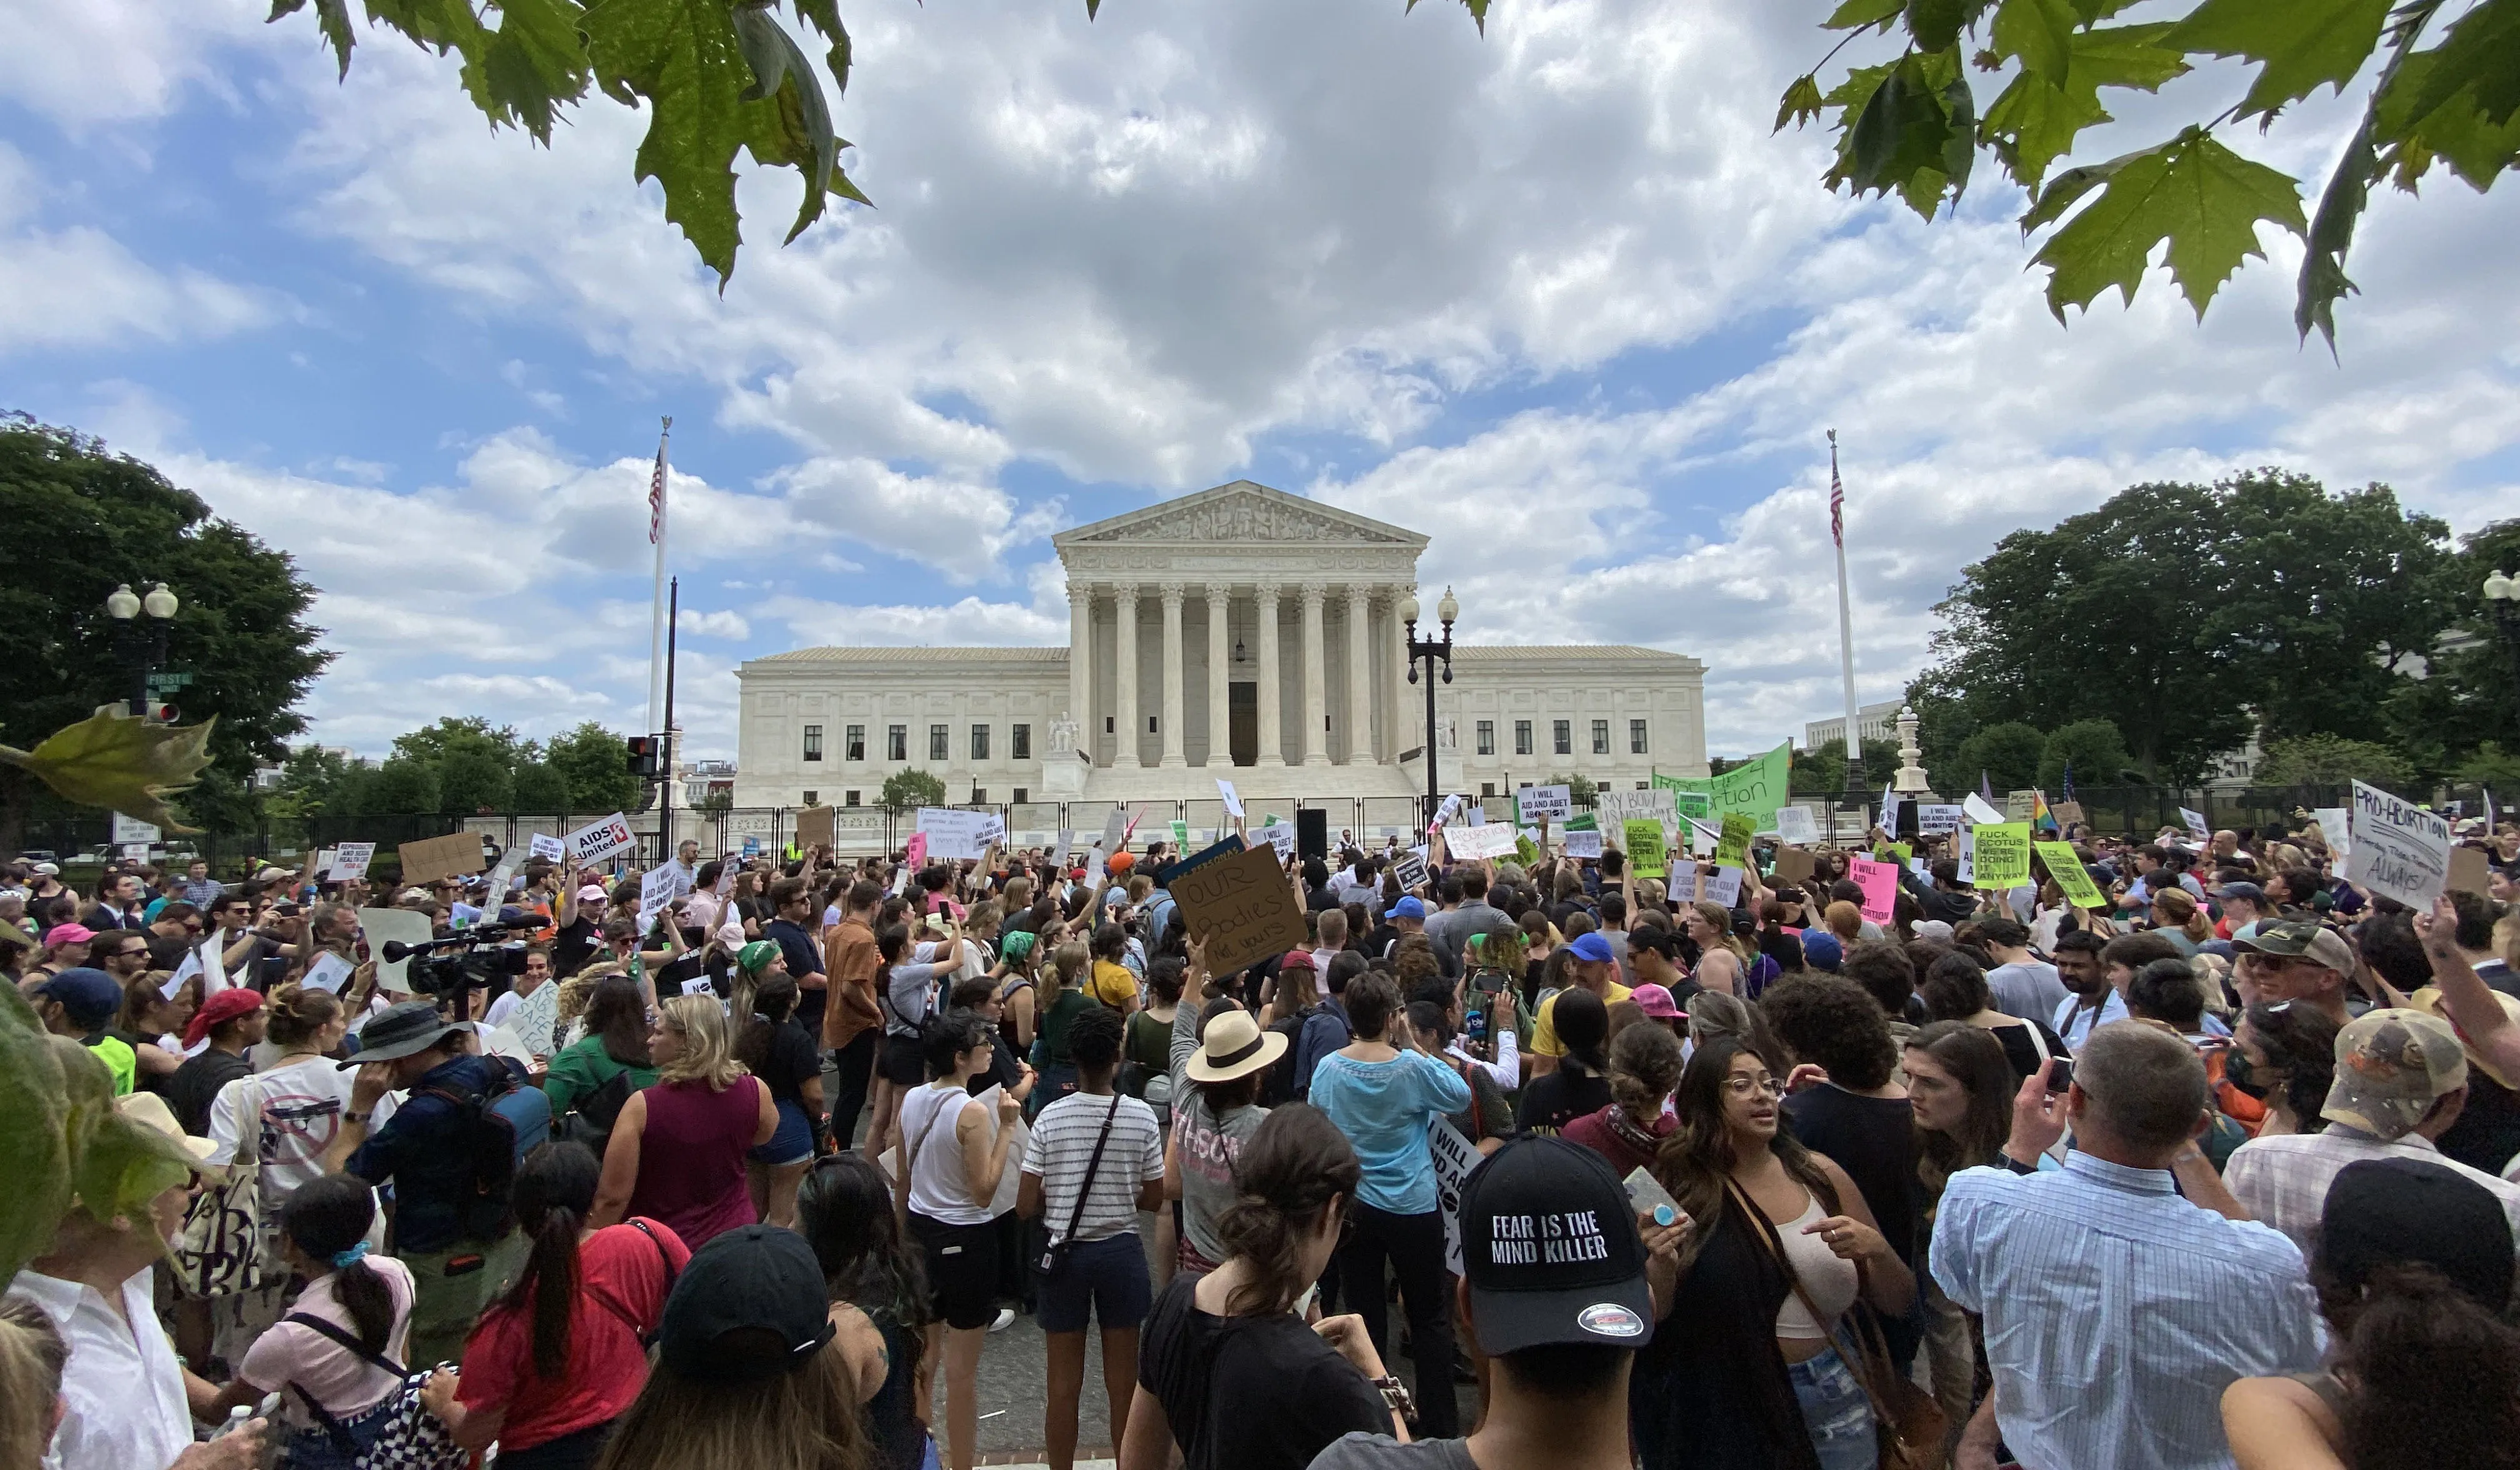 Demonstrators on both sides of the abortion issue outside the U.S. Supreme Court in Washington, D.C., after the court released its decision in the Dobbs abortion case on June 24, 2022.?w=200&h=150